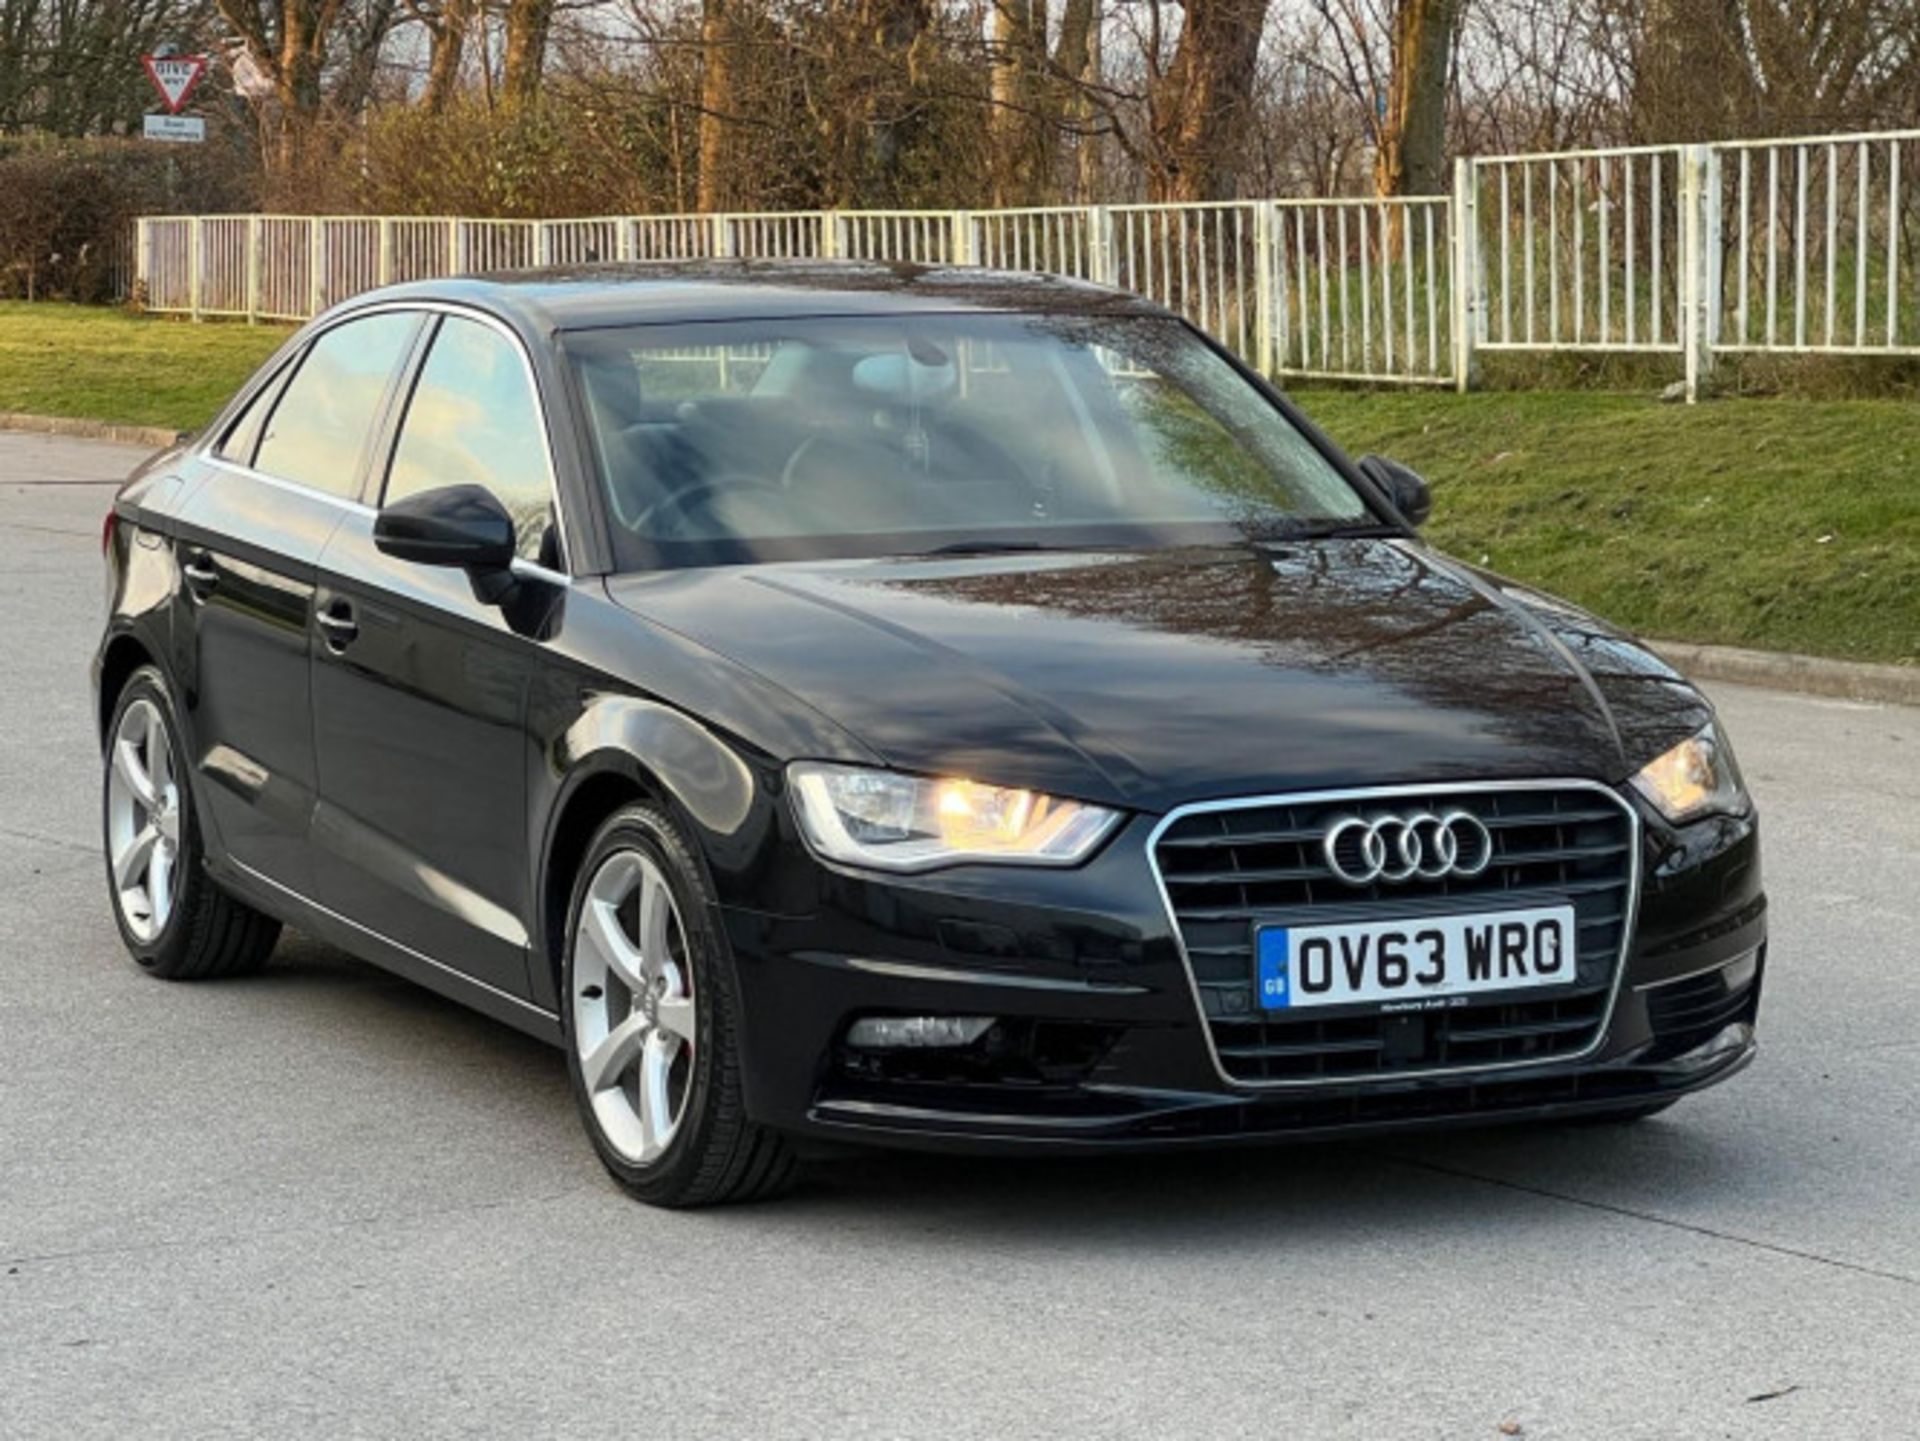 AUDI A3 2.0TDI SPORTBACK - STYLE, PERFORMANCE, AND COMFORT COMBINED >>--NO VAT ON HAMMER--<< - Image 199 of 216